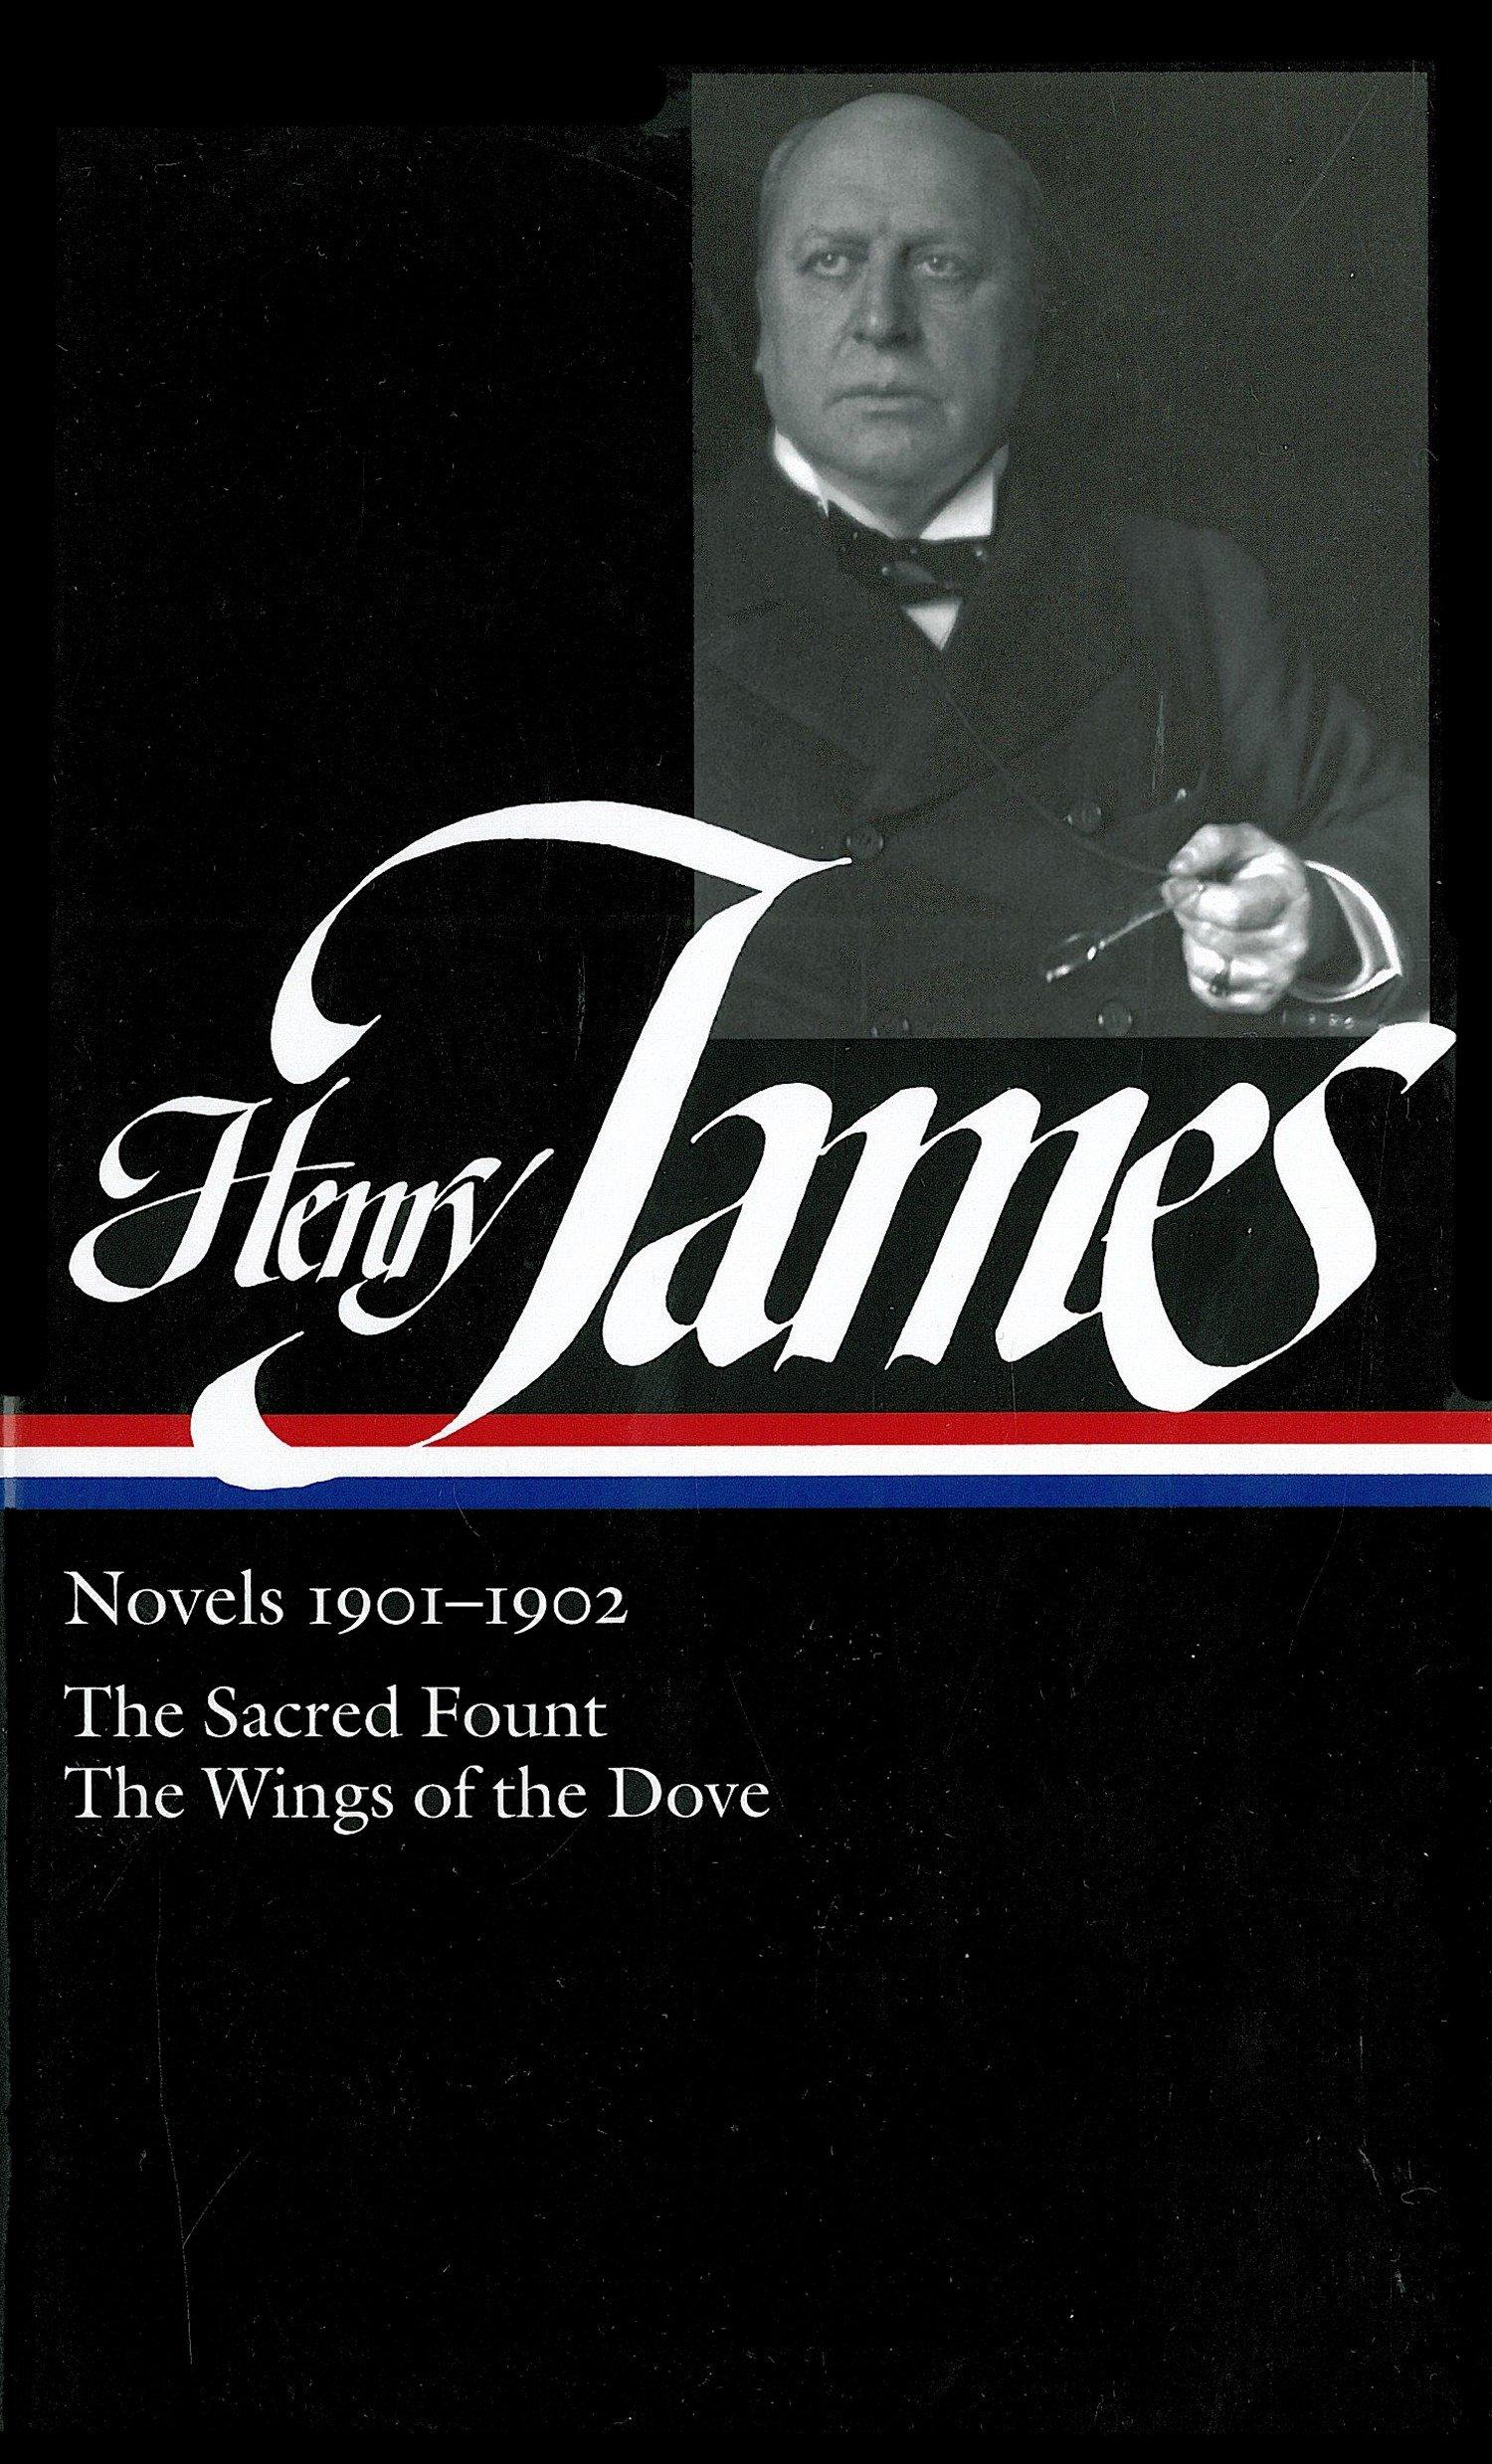 Henry James: Novels 1901-1902 (LOA #162) / The Sacred Fount / The Wings of the Dove / Henry James / Buch / Einband - fest (Hardcover) / Englisch / 2006 / The Library of America / EAN 9781931082884 - James, Henry